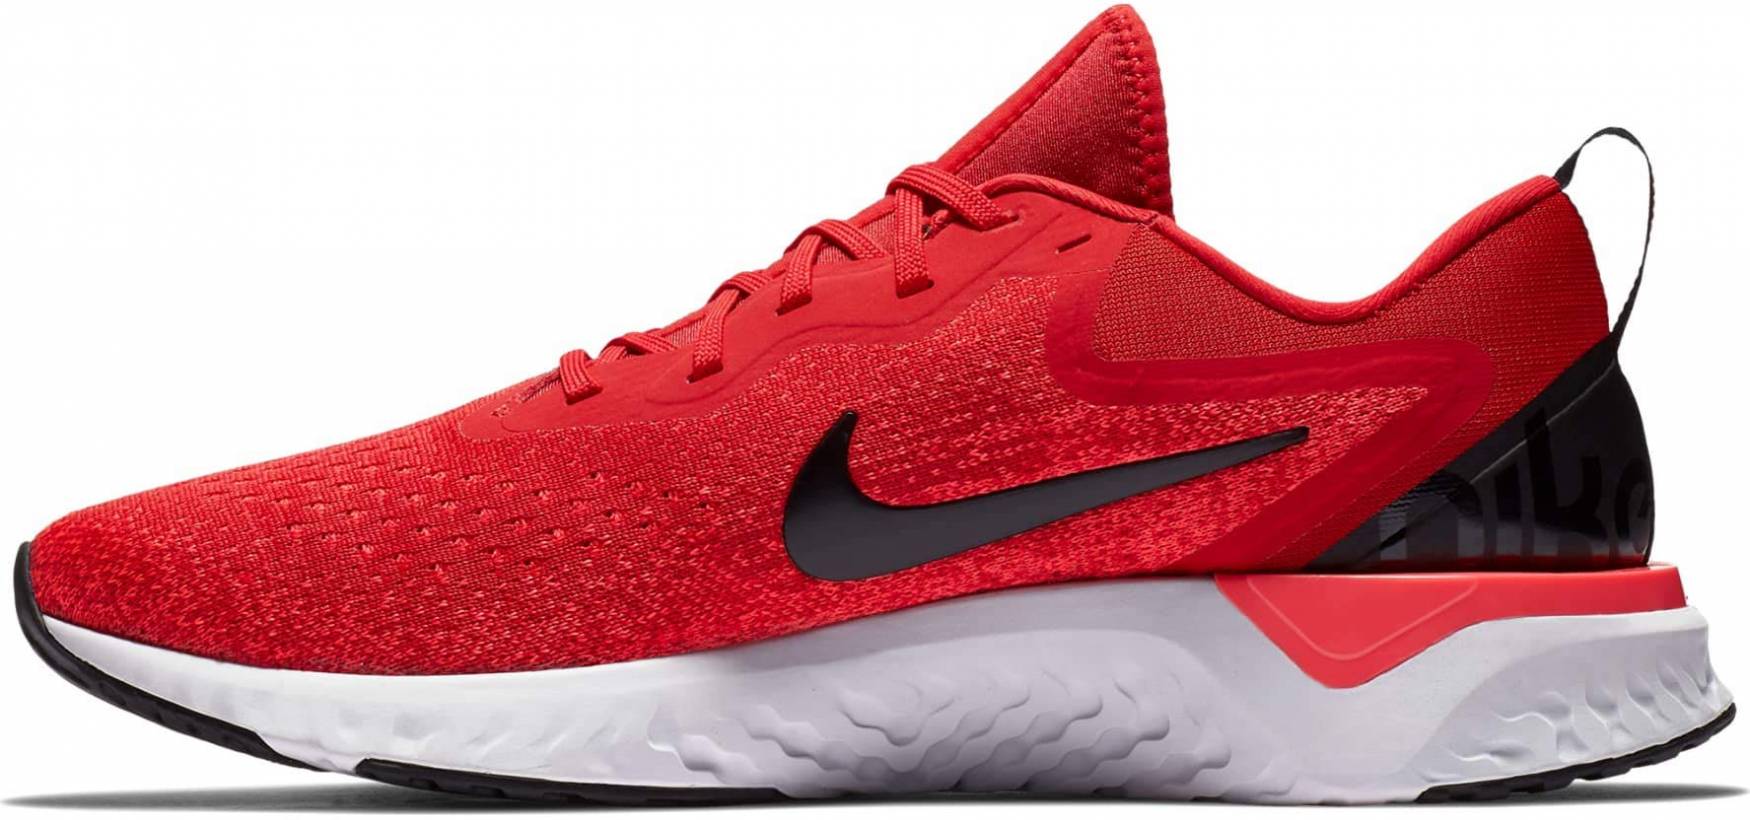 Save 37% on Red Nike Running Shoes (31 